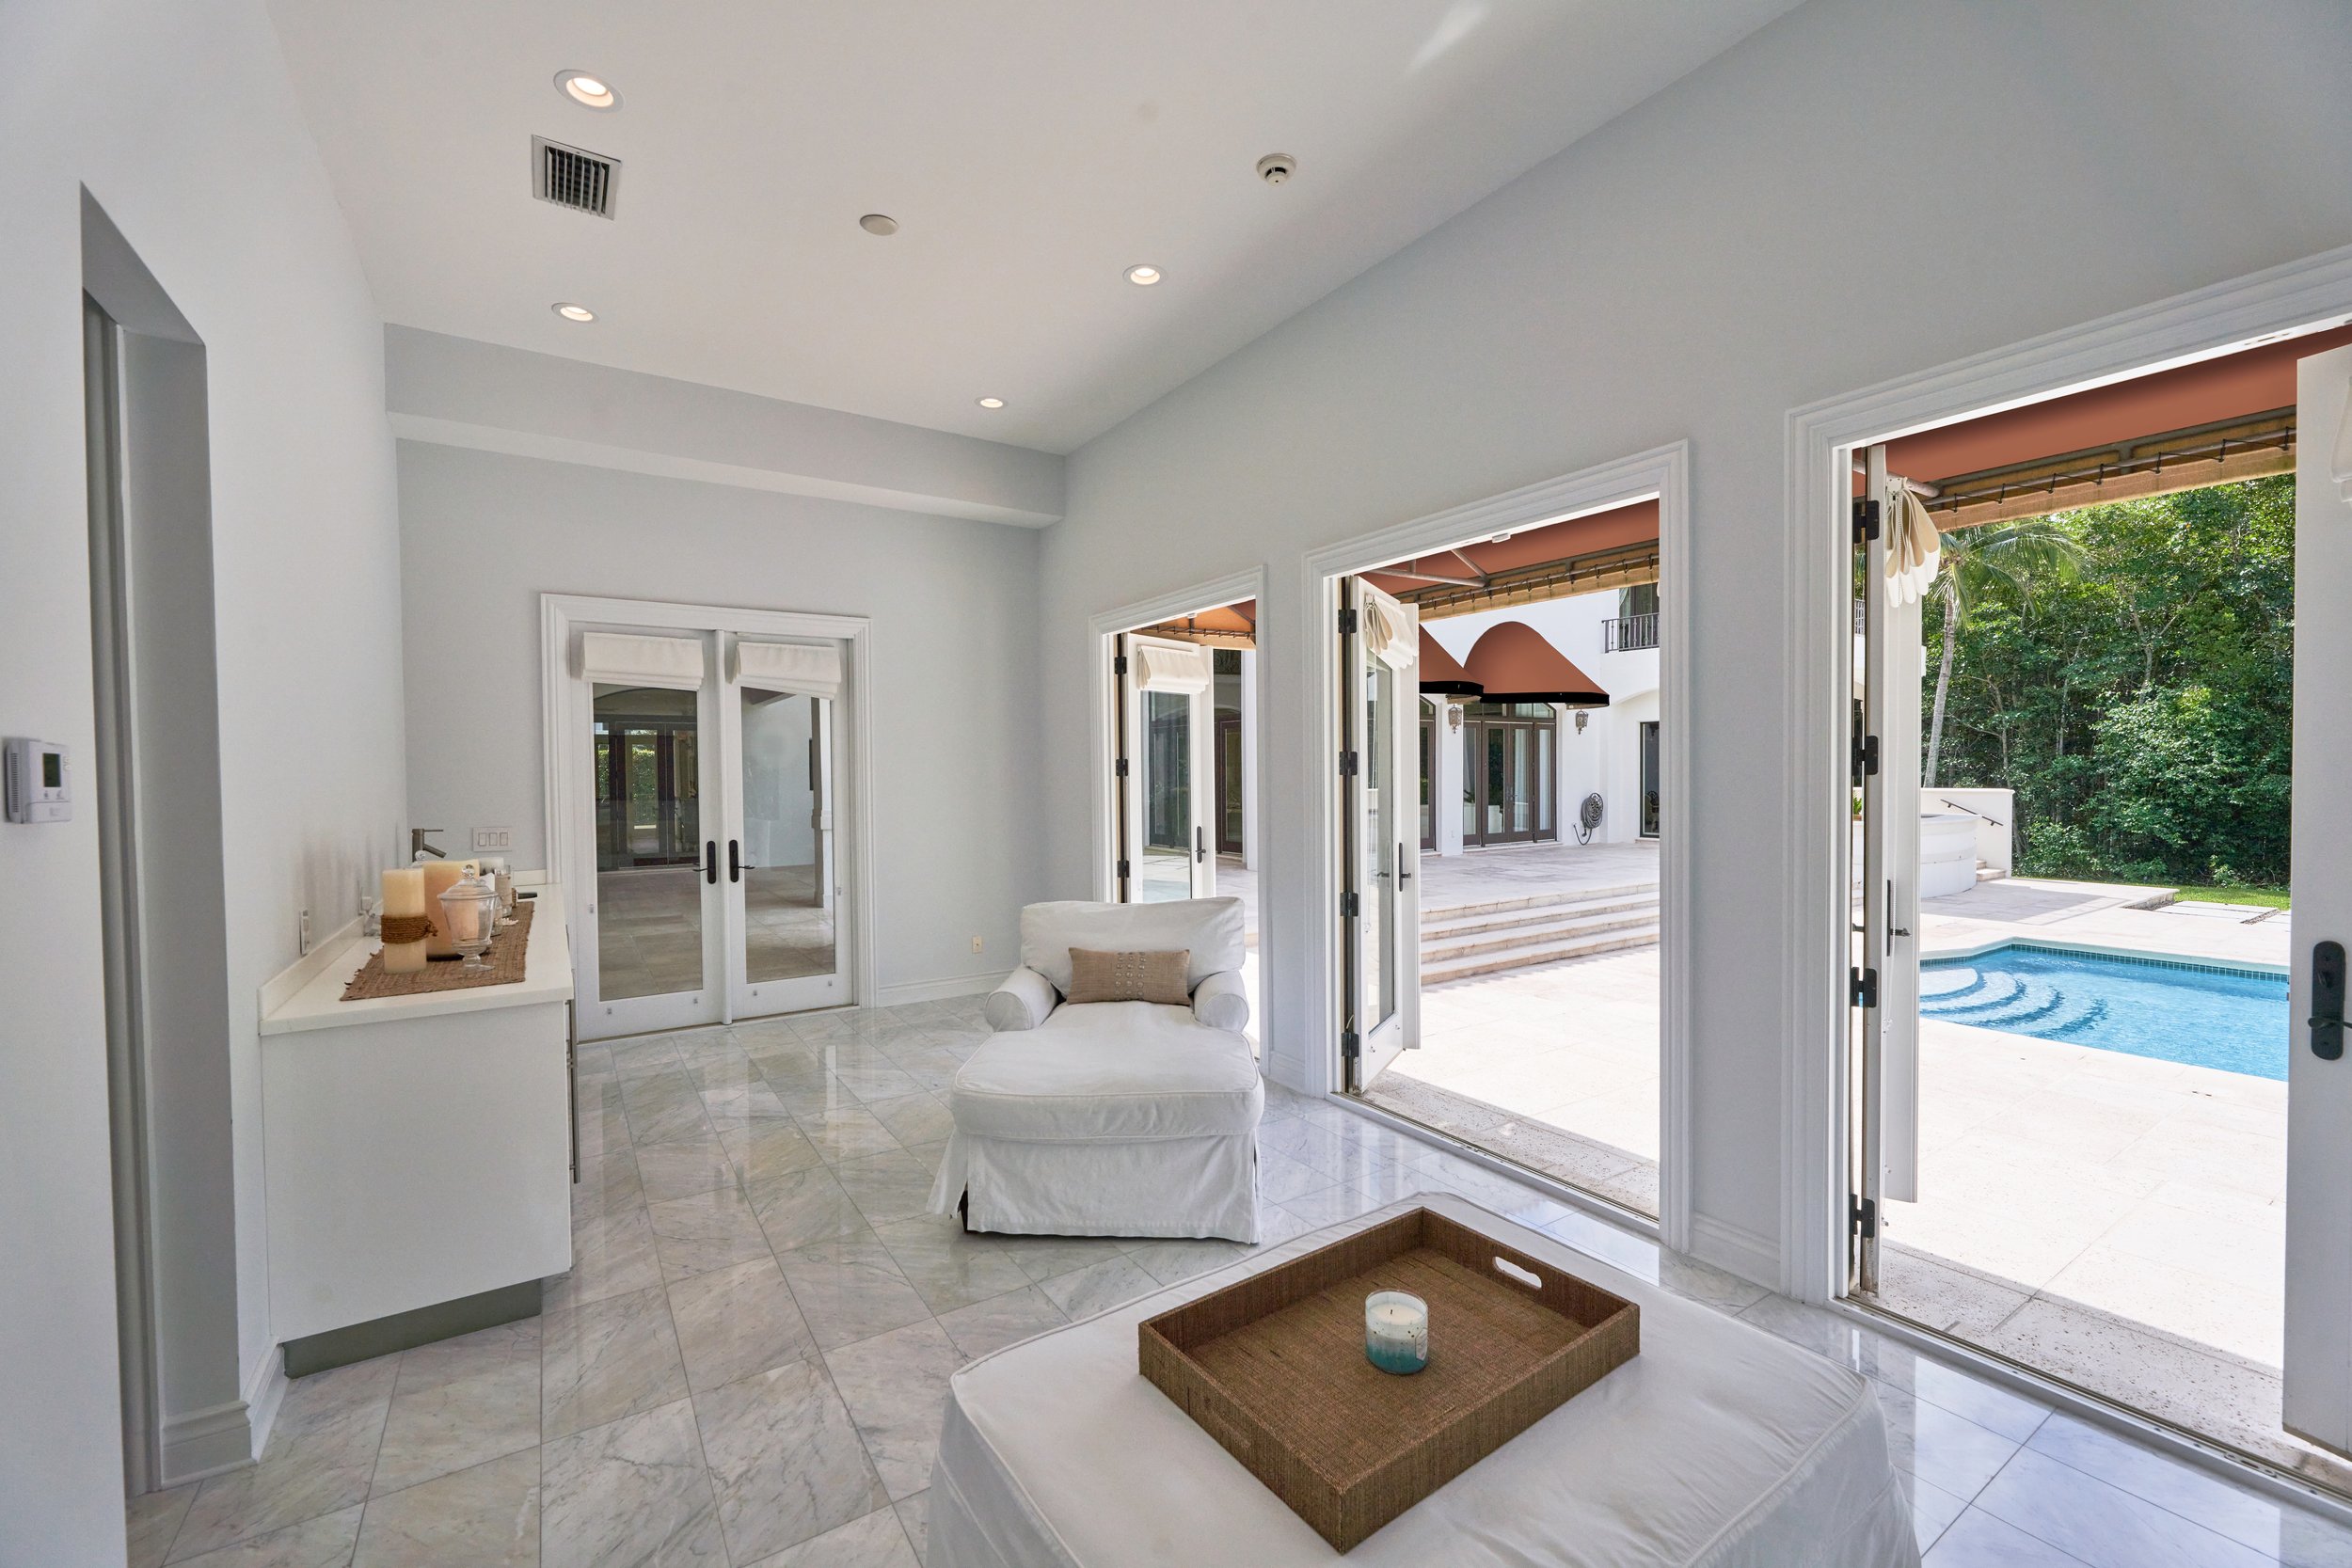 Step Inside This Coral Gables Mansion In The Exclusive Tahiti Beach Asking $12.9 Million 18.jpg